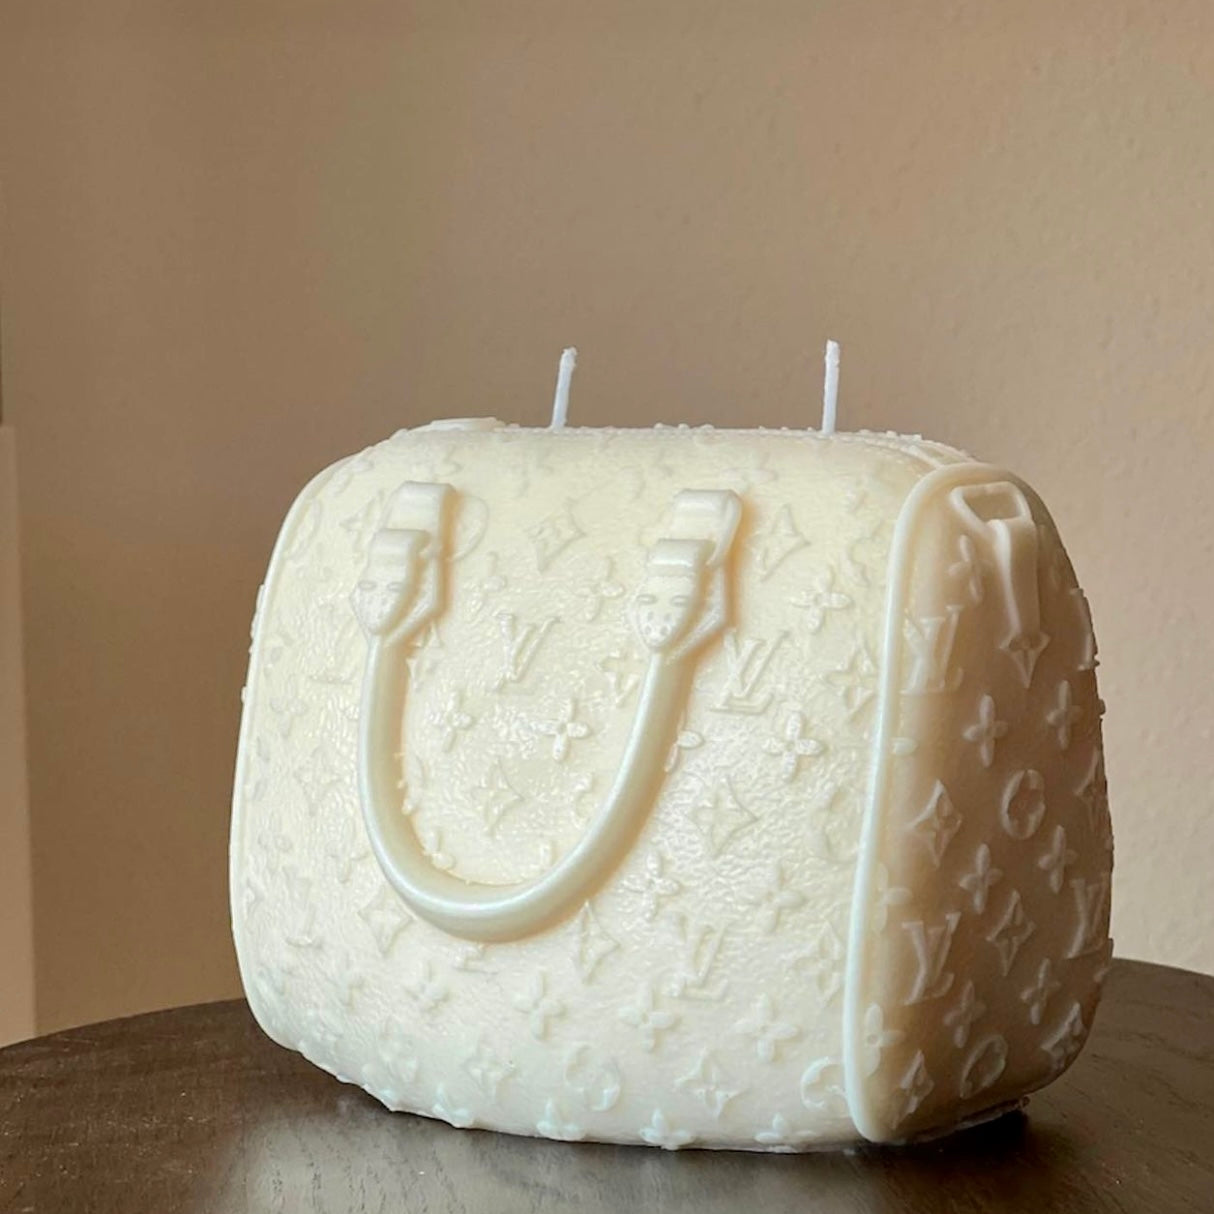 DIY Louis Vuitton Inspired Candle